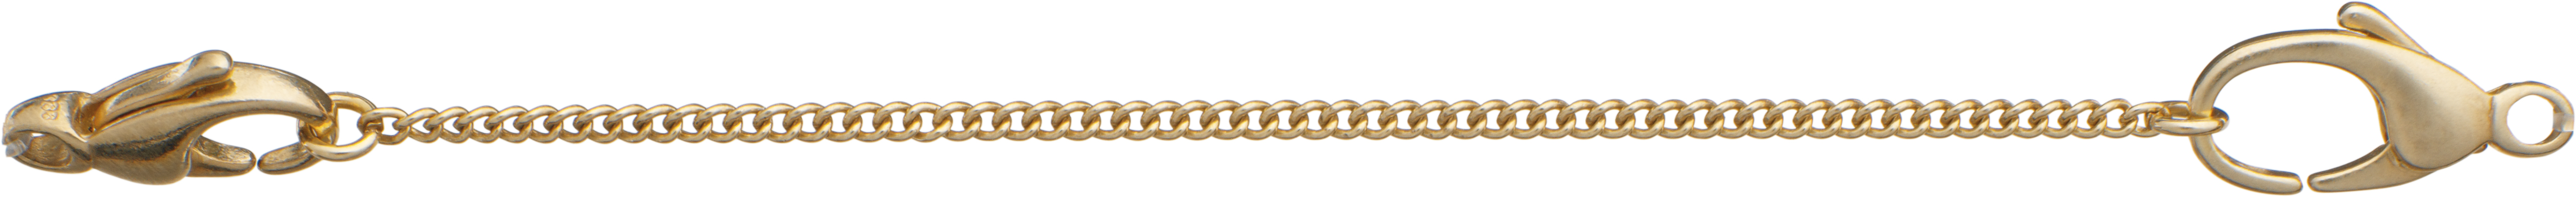 Safety chain curb gold 585/-Gg length 70,00mm, with open jump rings